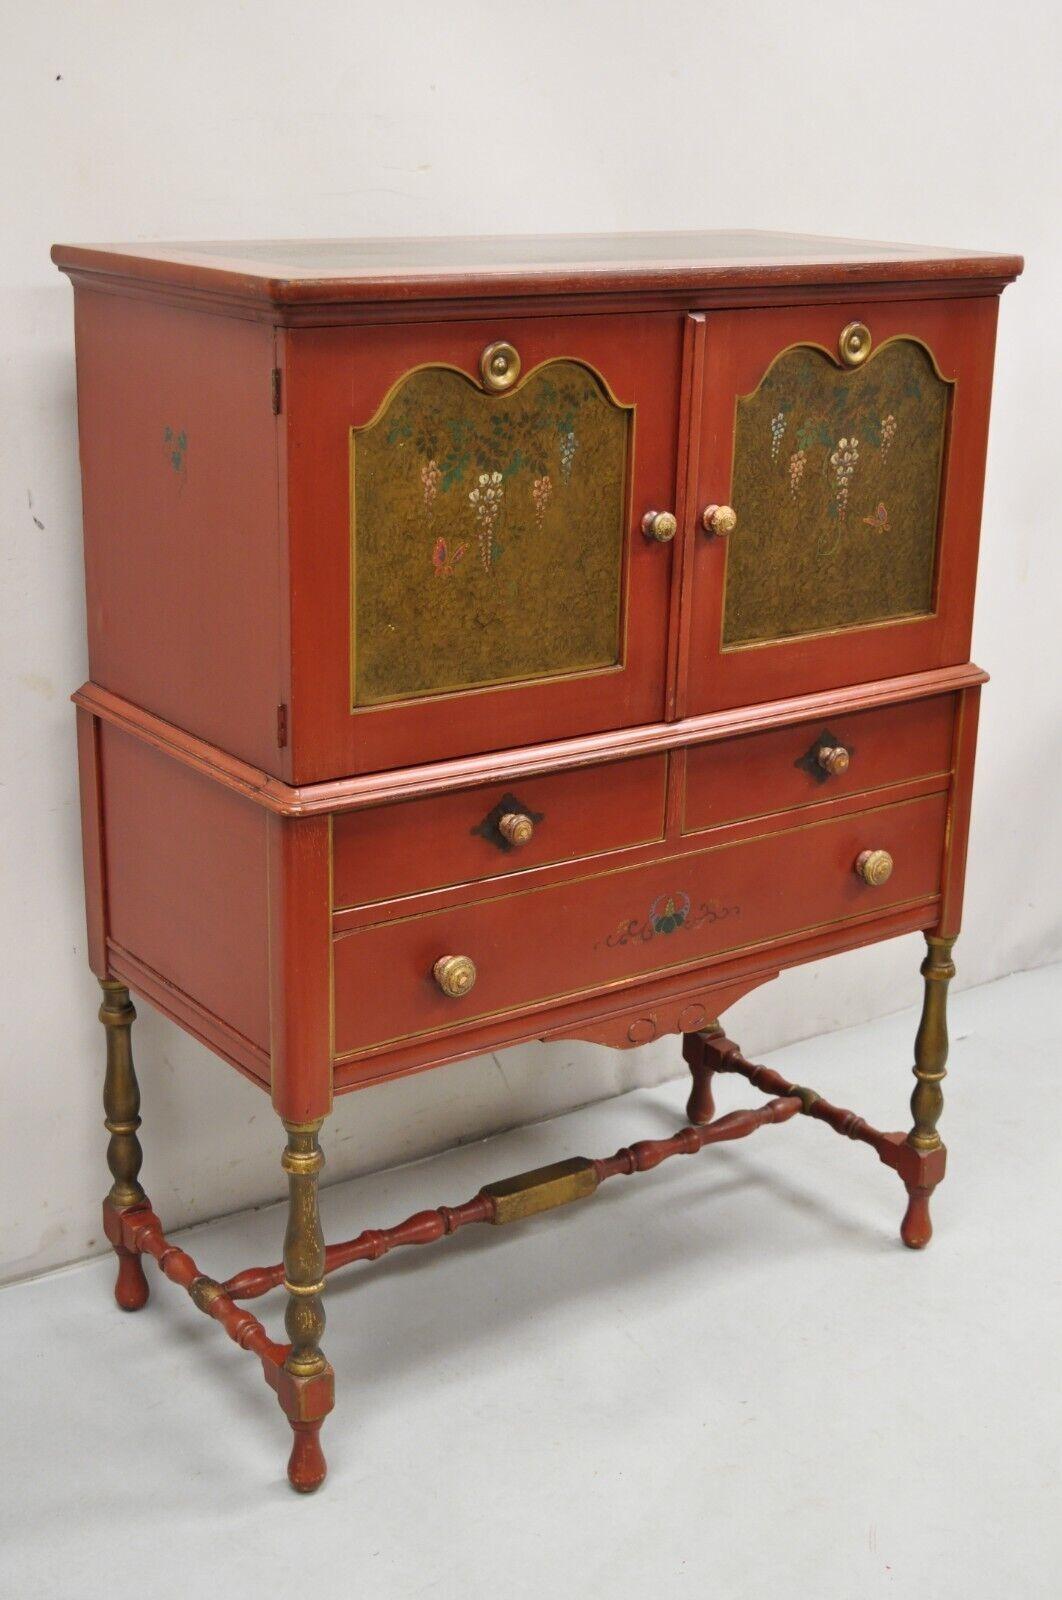 Quaint Furniture Stickley Bros Small Red Painted Colonial Style Cupboard Cabinet.  Item featured is a nice smaller size, original paint details, 3 dovetailed drawers, original label, very 